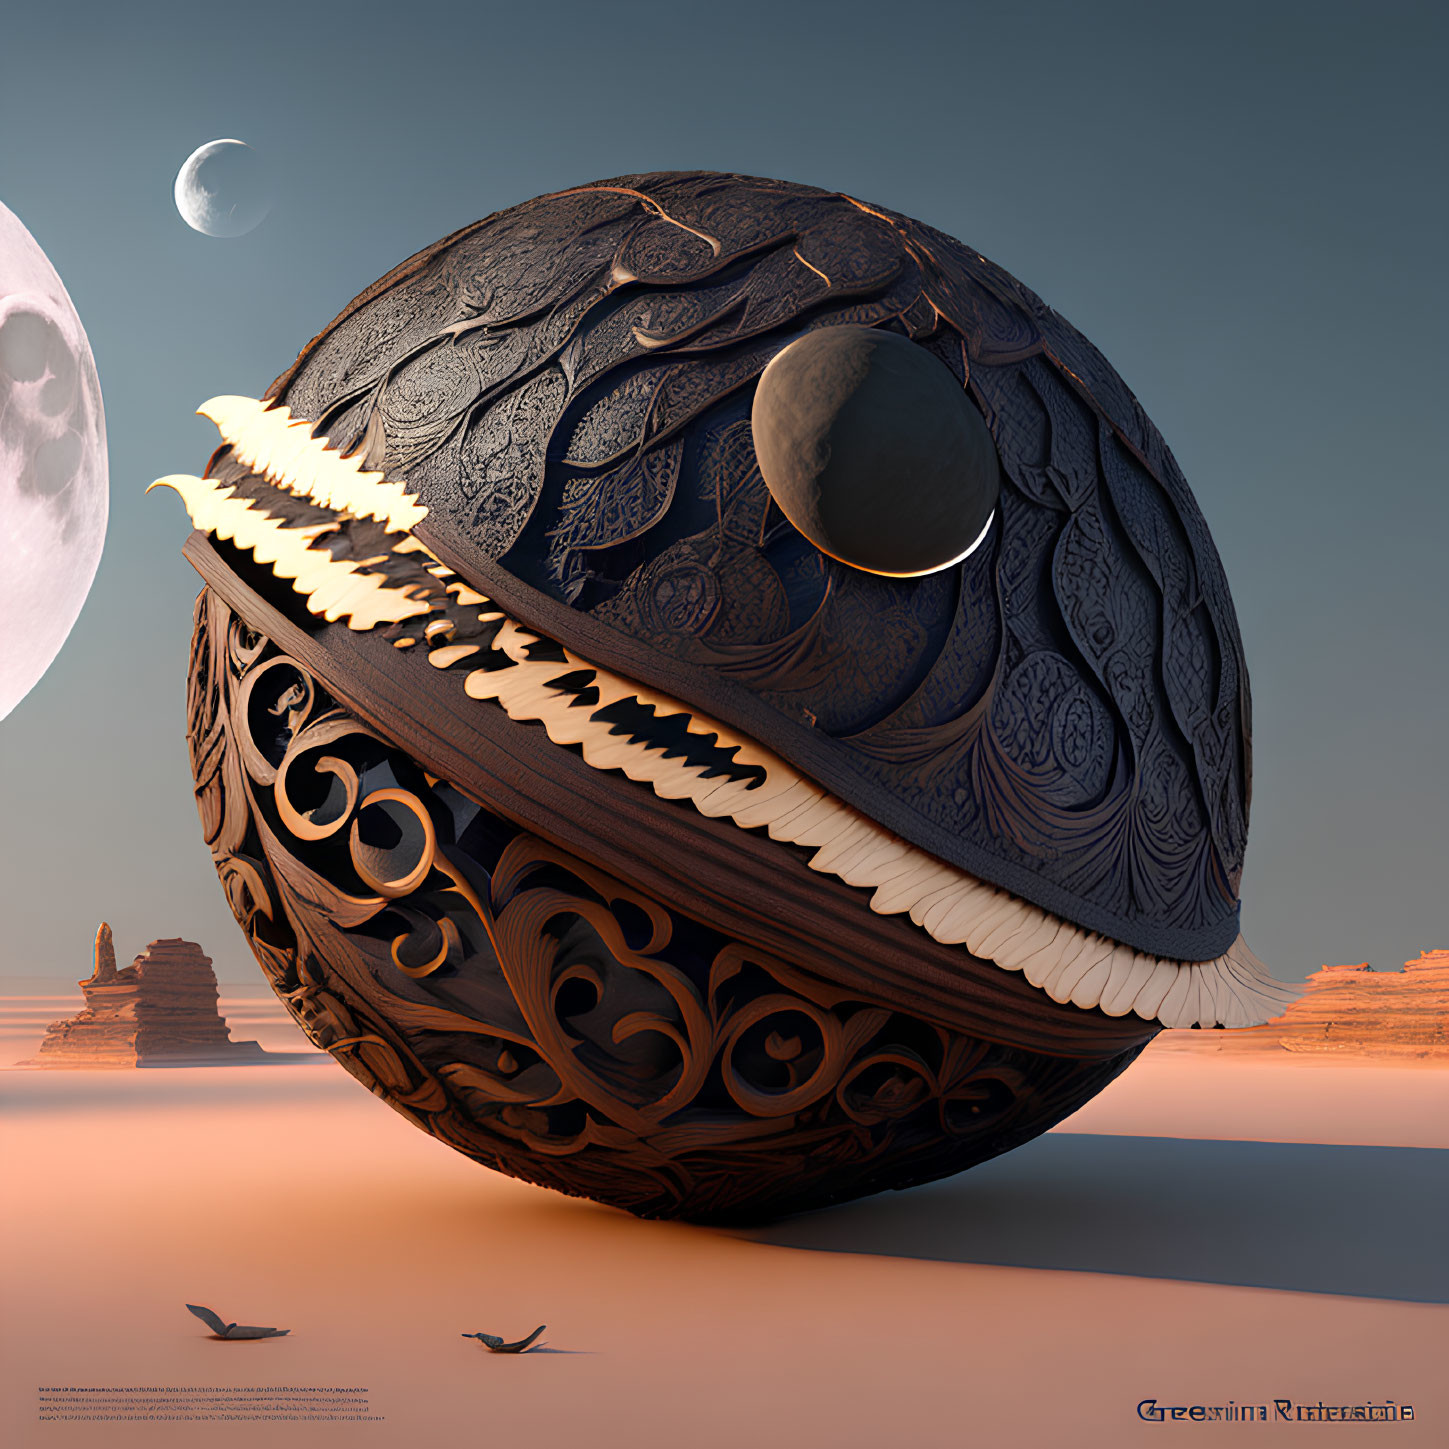 Ornate split sphere with desert backdrop and crescent moon